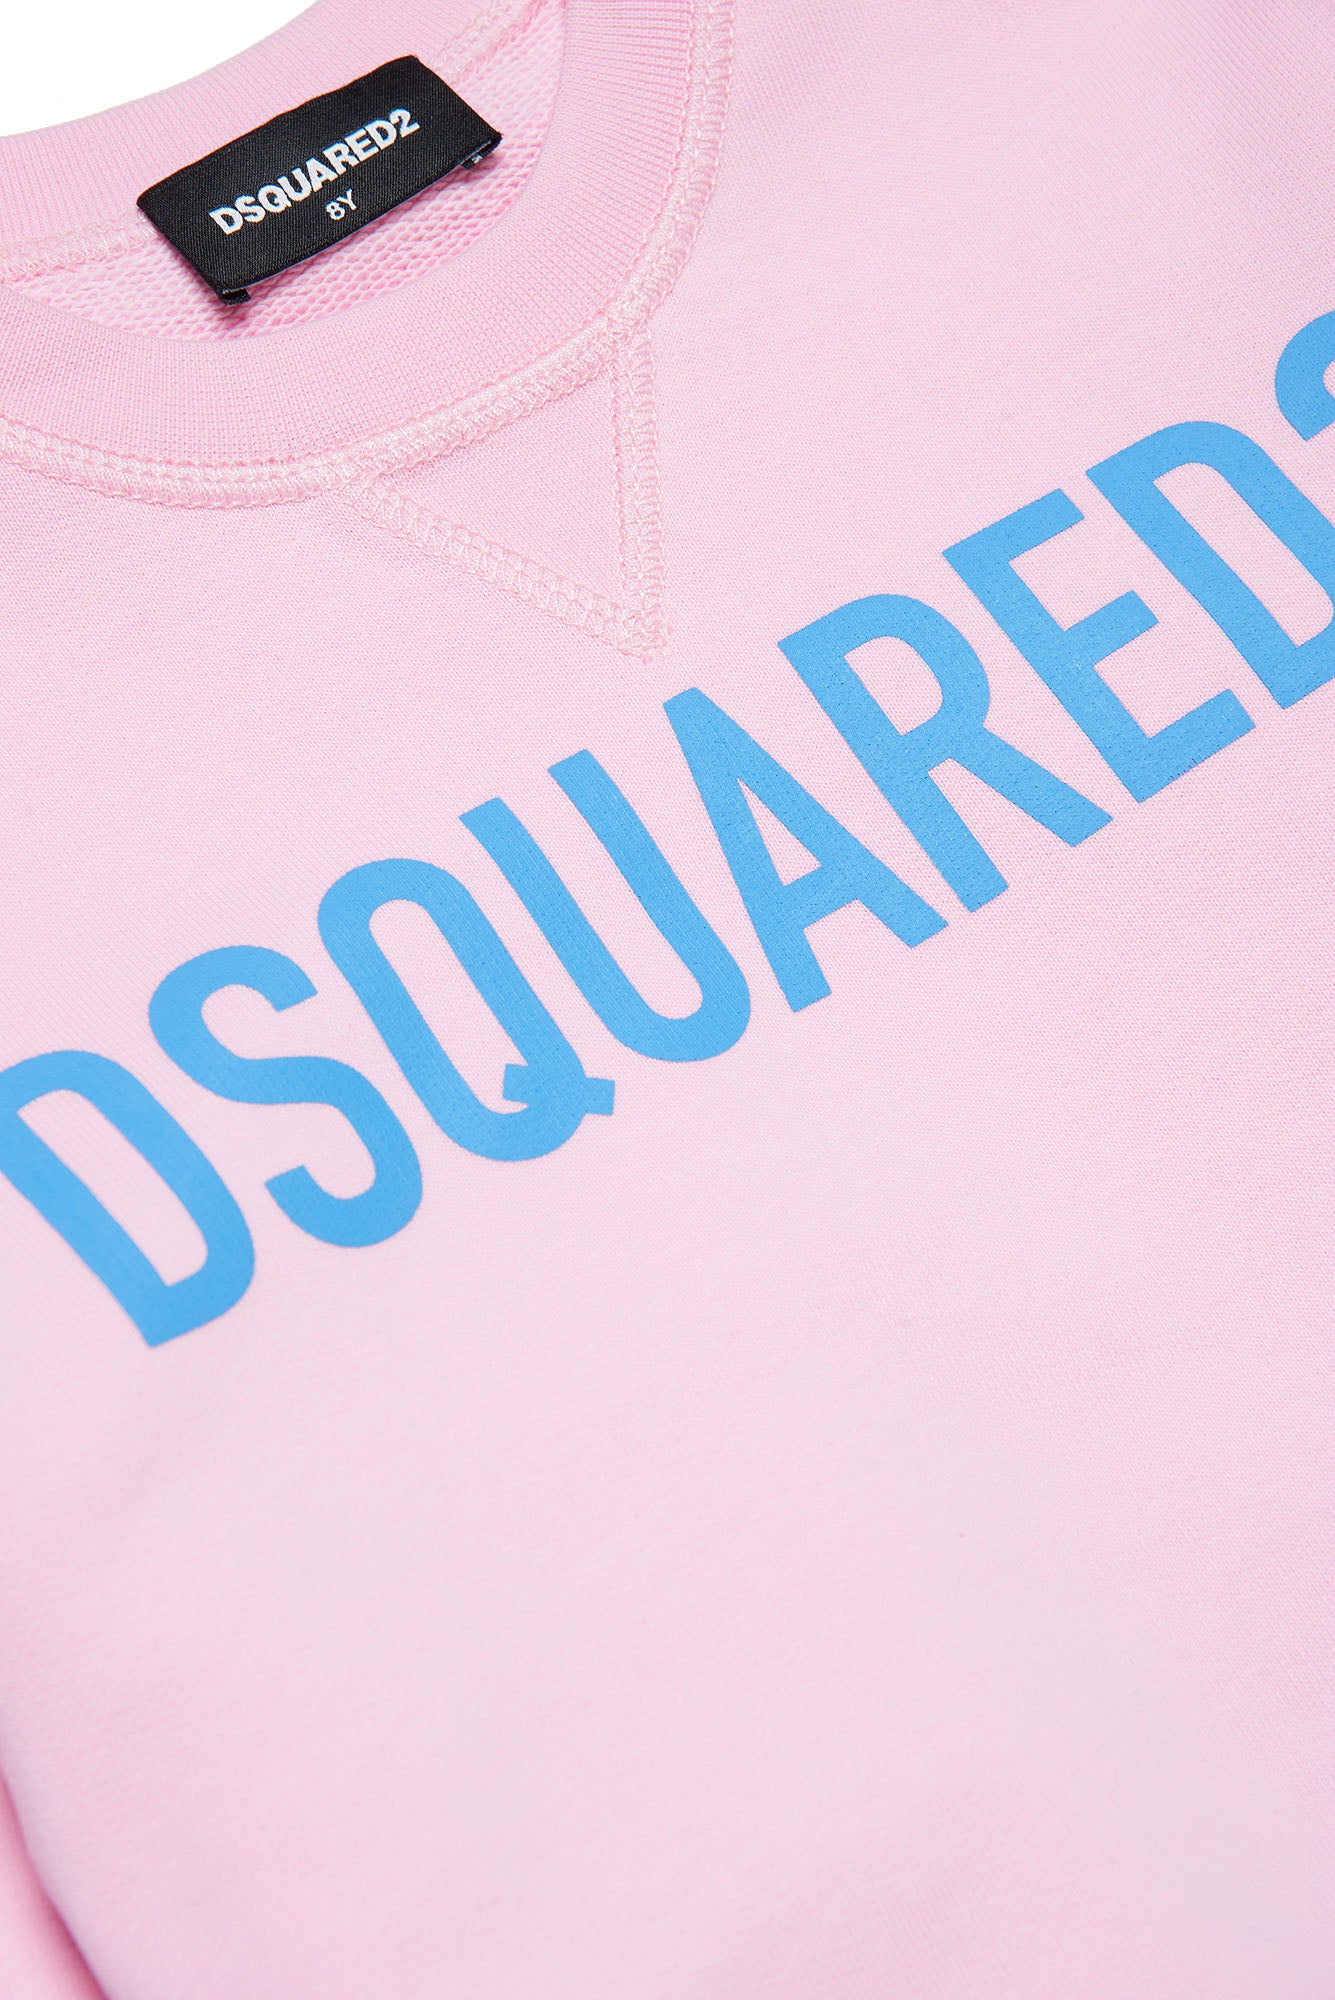 Dsquared2 Felpa Unisex Bambino DQ2009 D0A4D PINK LADY